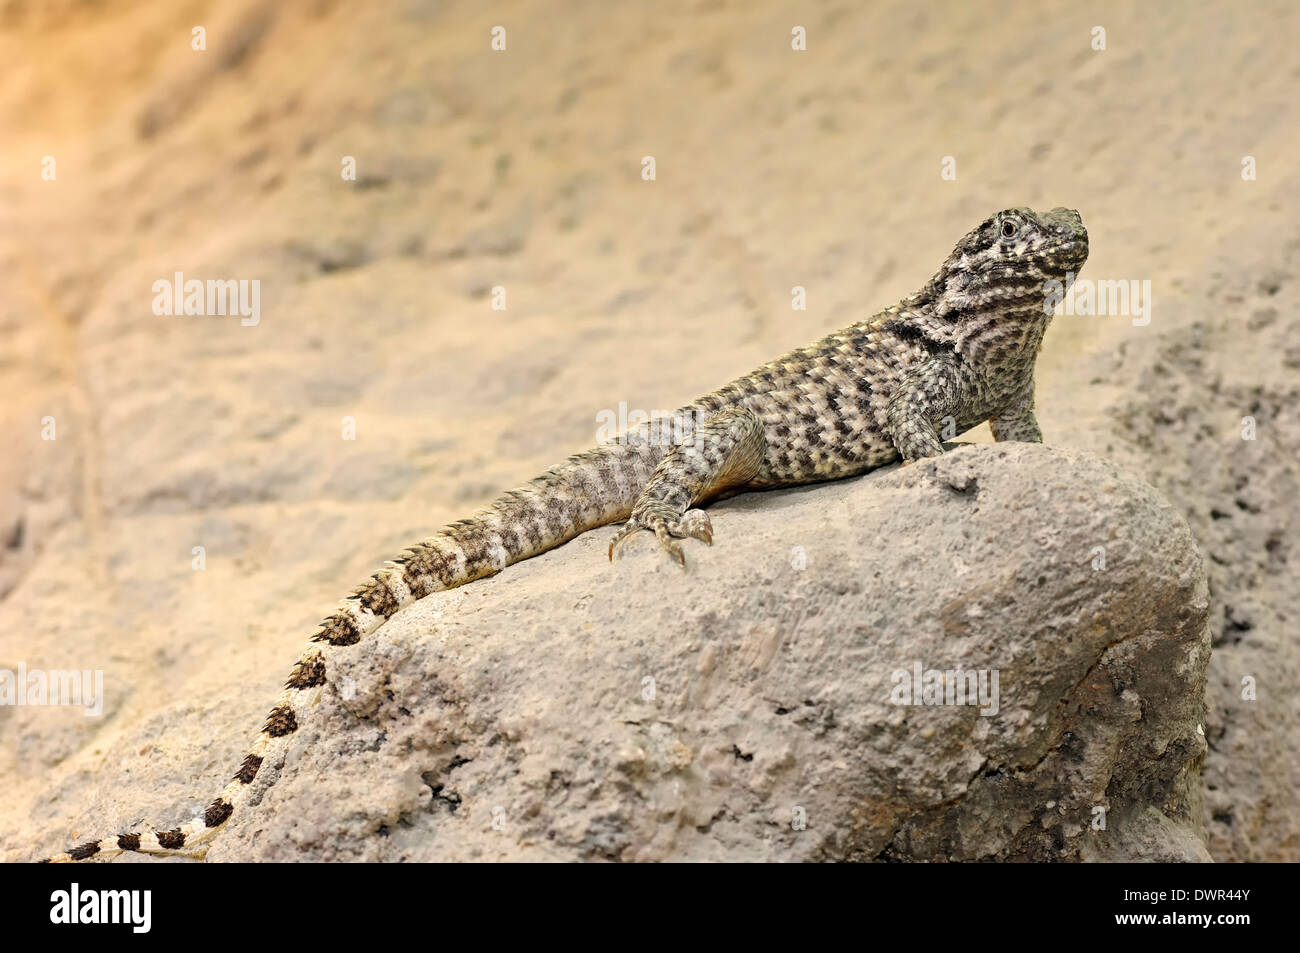 Northern Curly-tailed Lizard or Northern Curlytail Lizard (Leiocephalus carinatus) Stock Photo